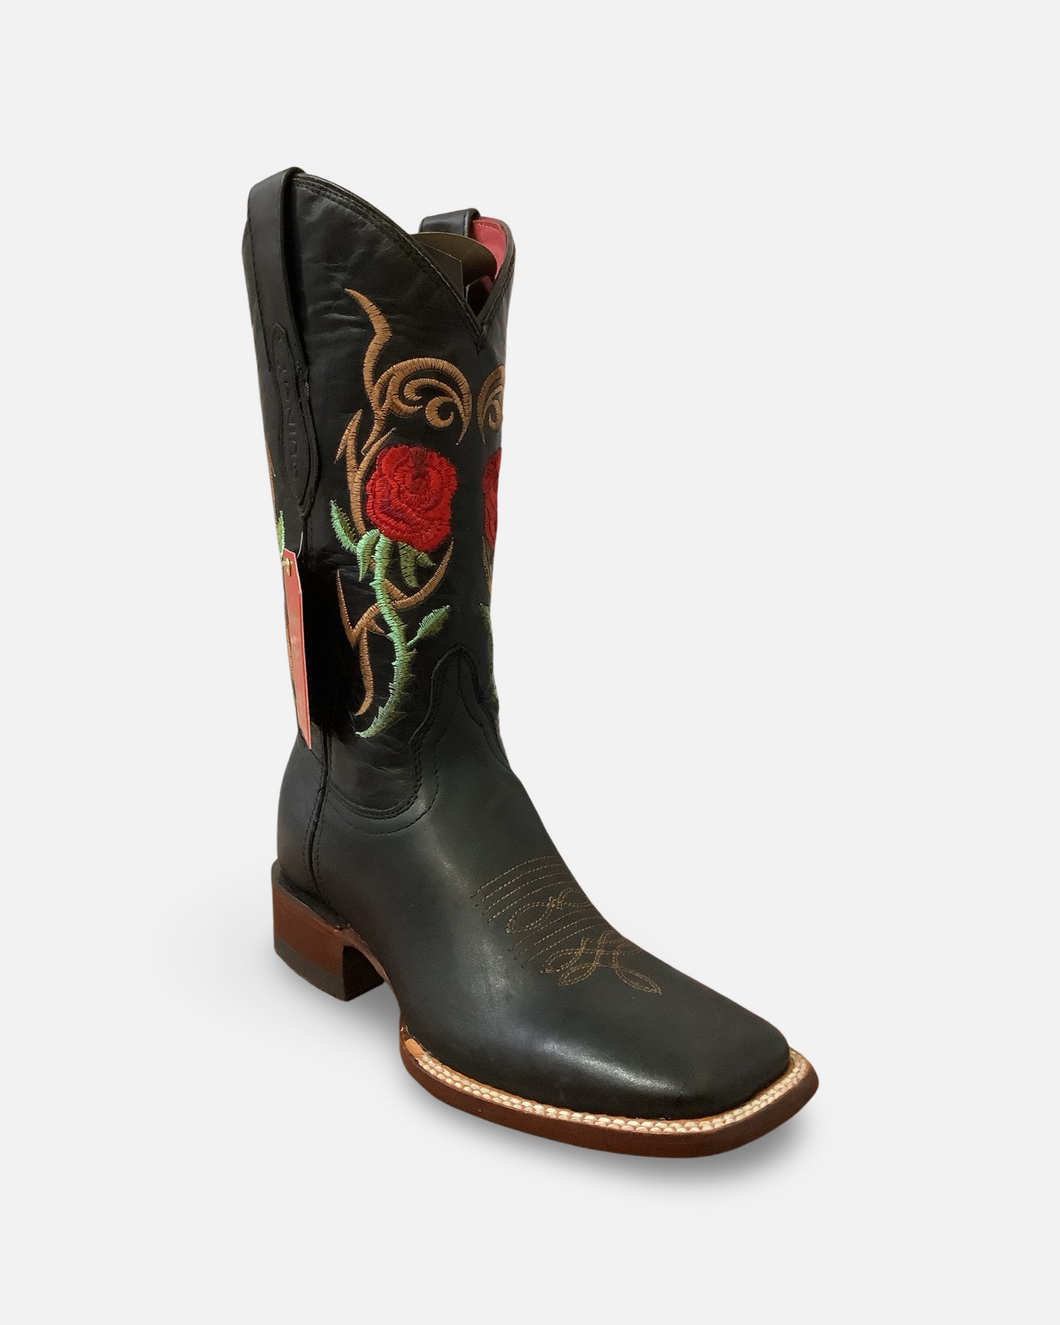 Quincy Boots Black and Red Roses Wide Square Toe Boot